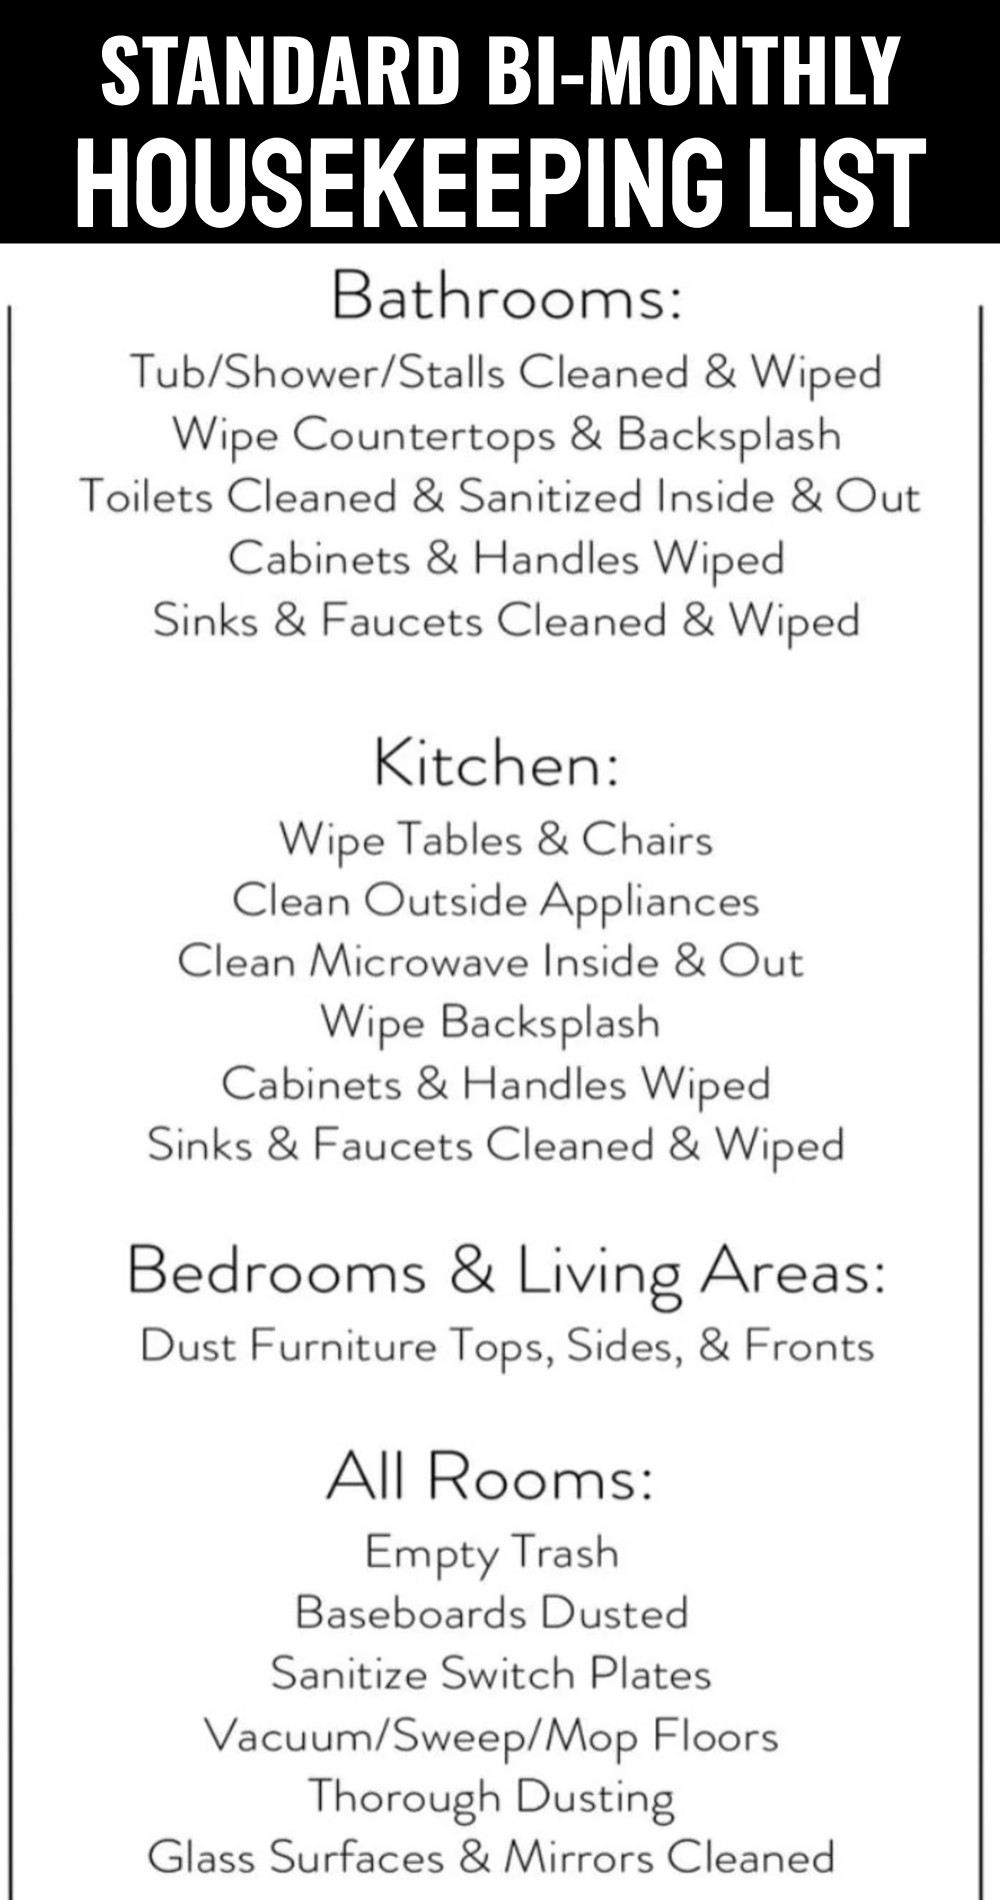 standard bi-monthly house cleaning checklist for maid or housekeeper services